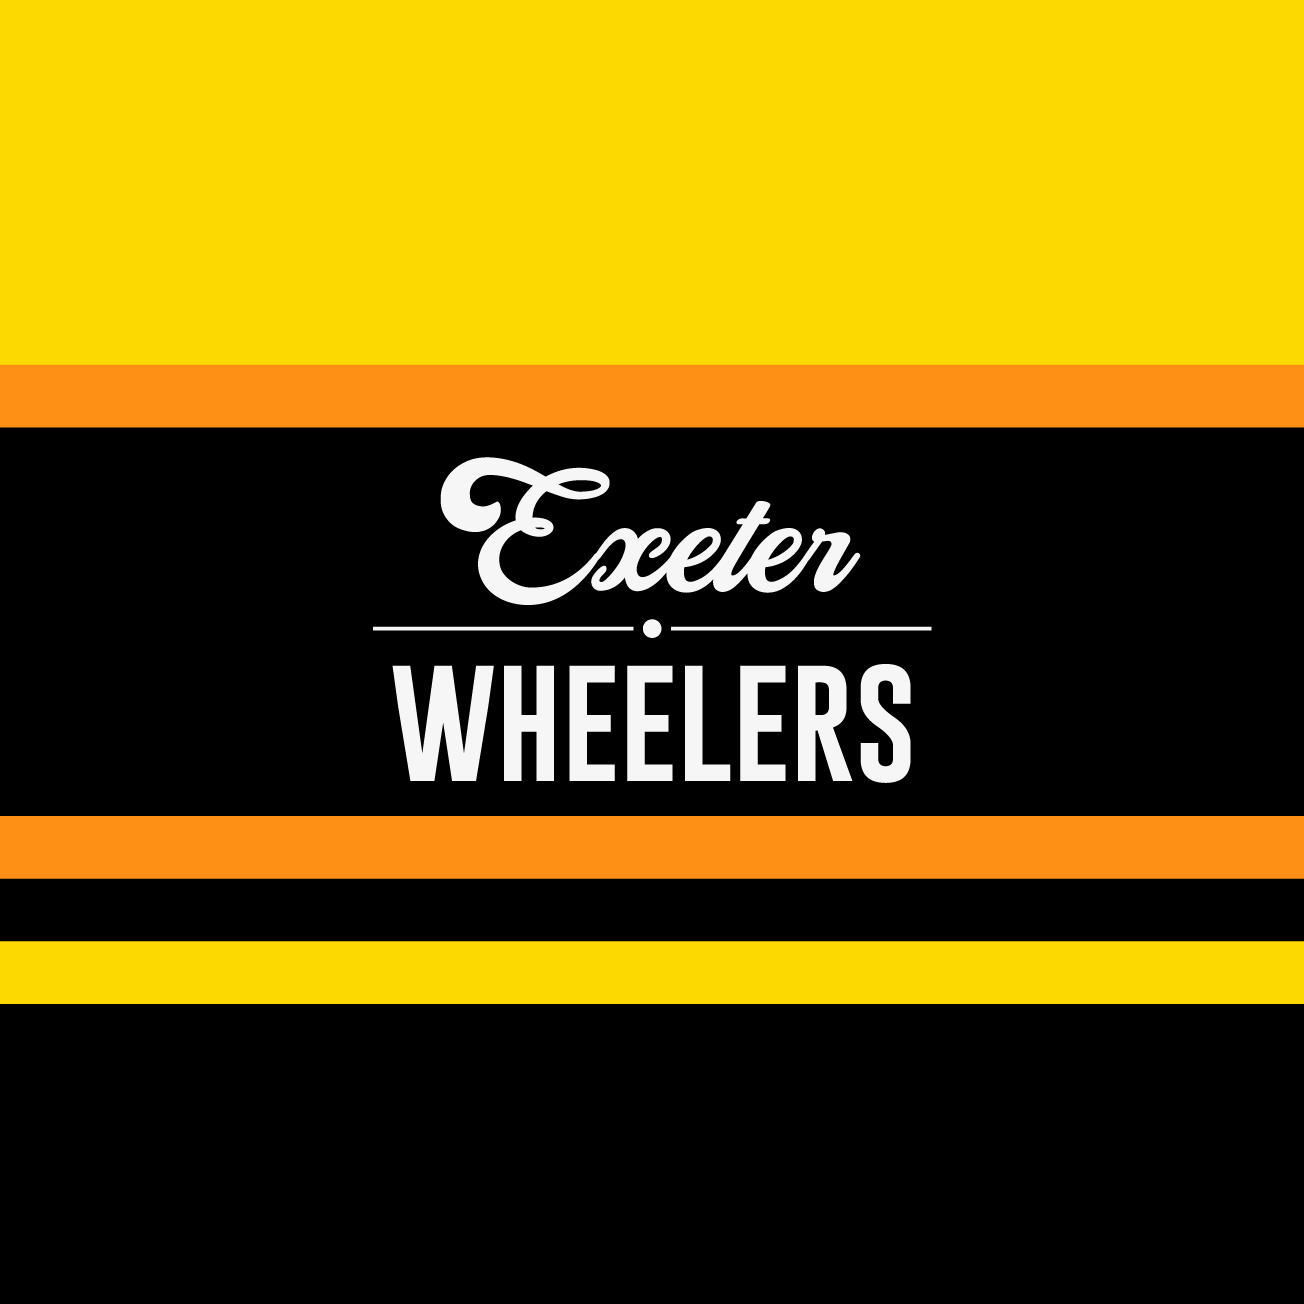 Club Image for EXETER WHEELERS